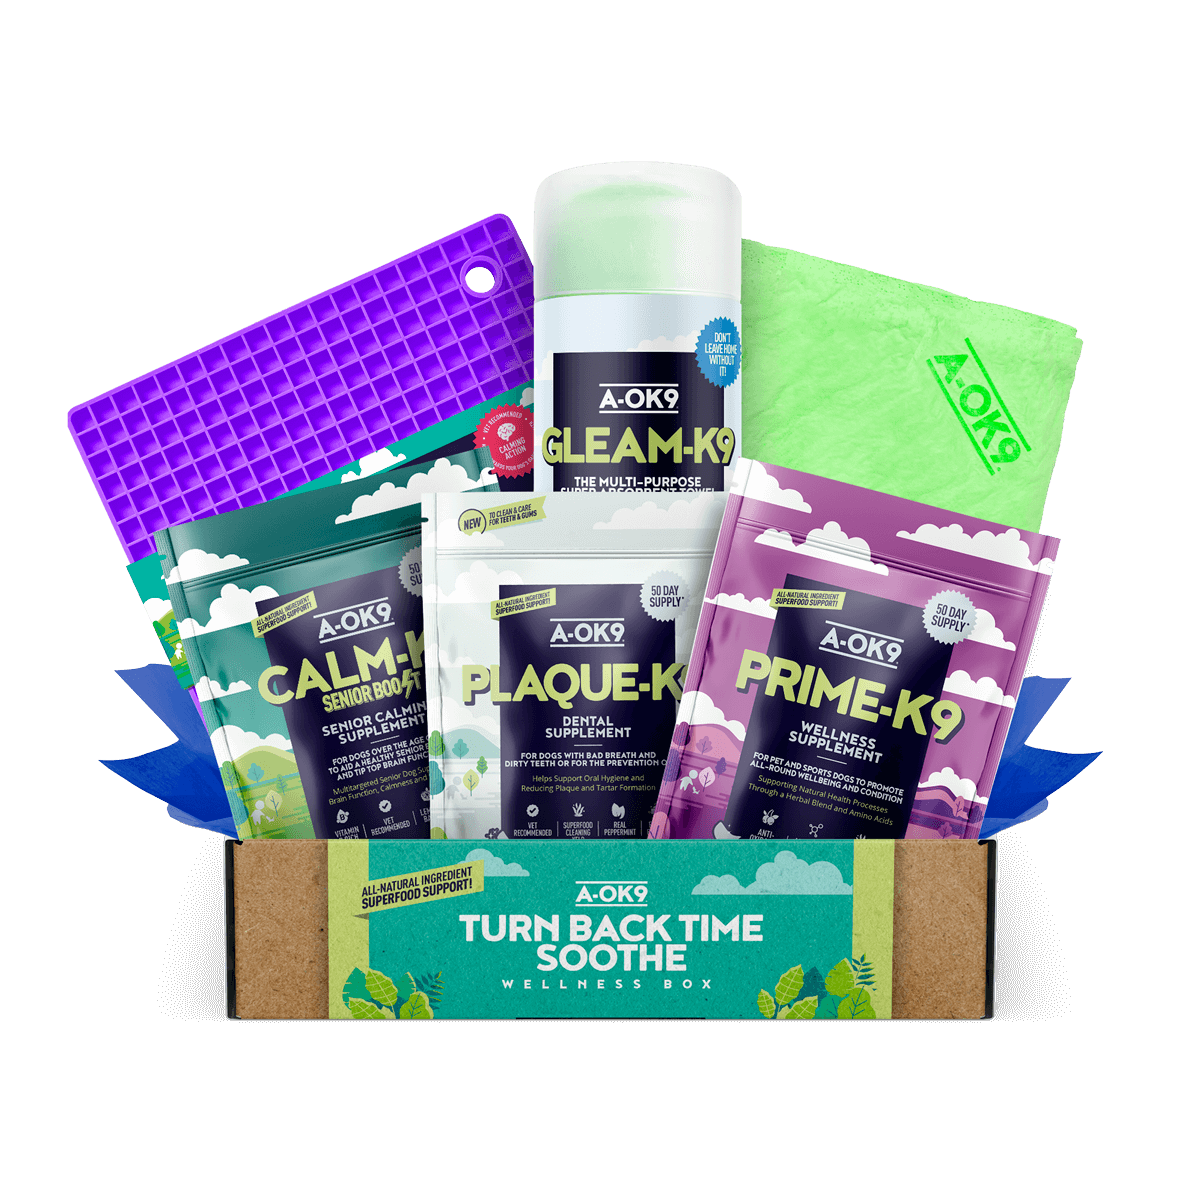 &#39;Turn Back Time - Soothed&#39; Wellness Box